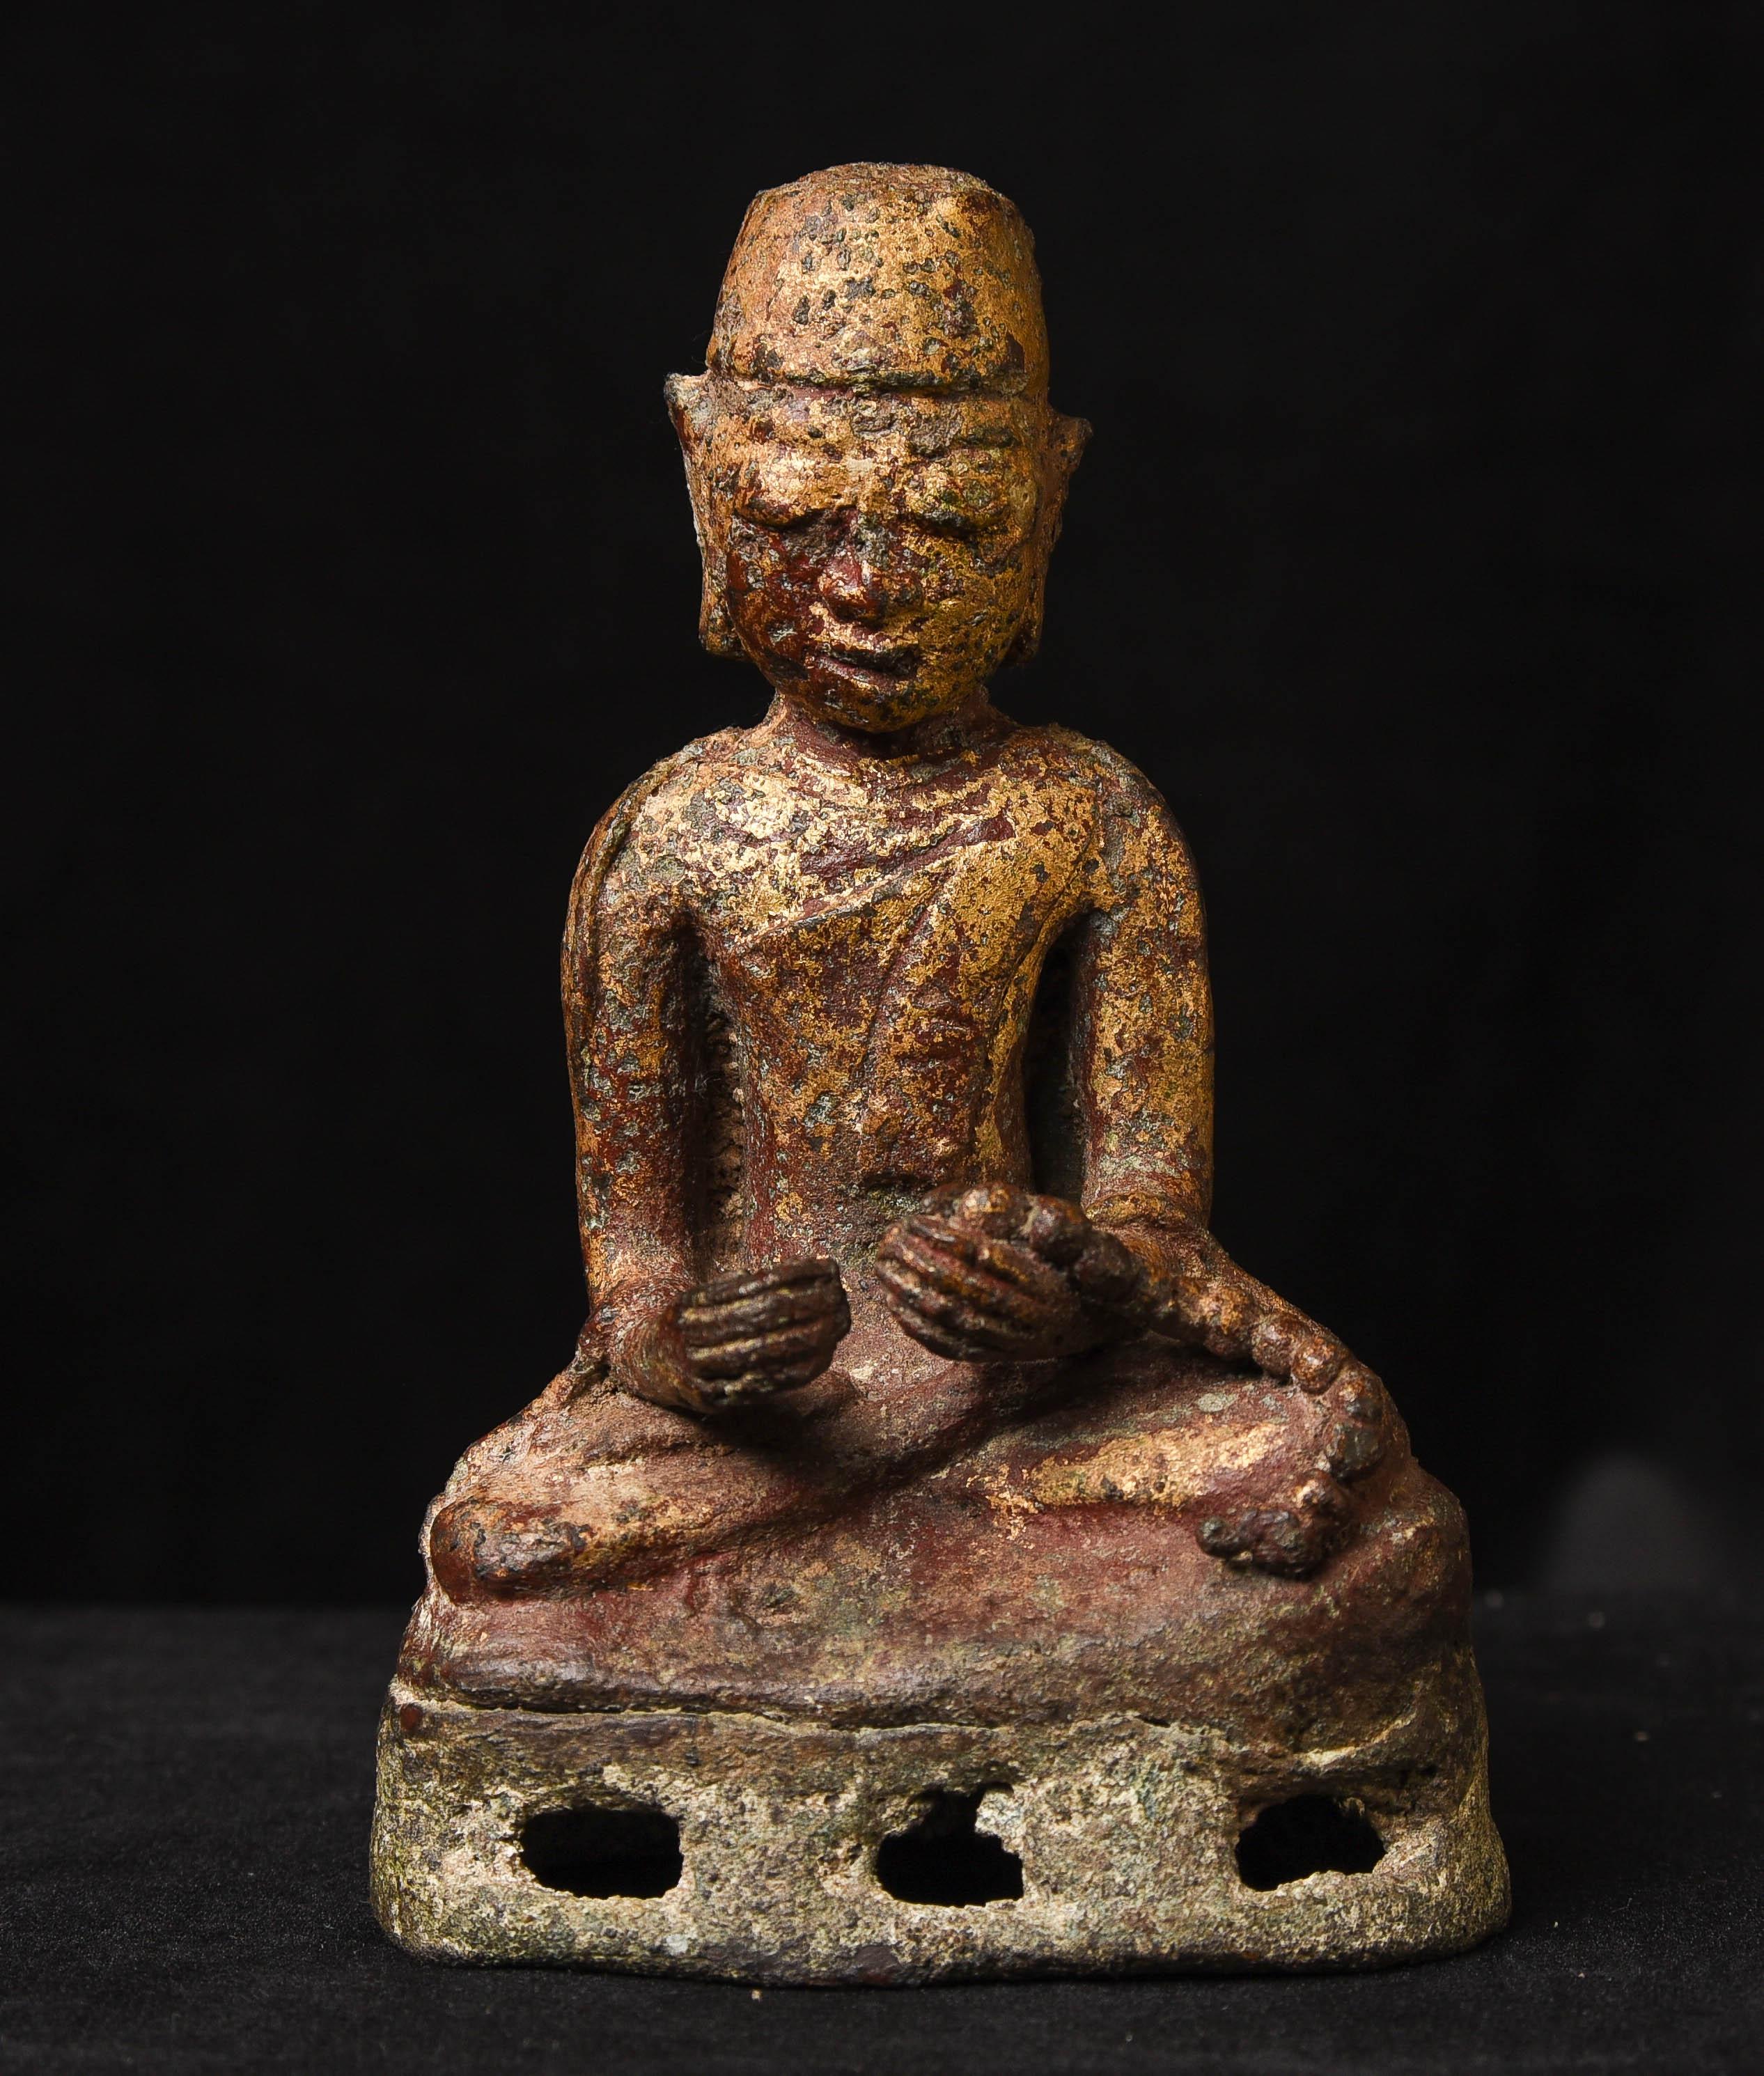 Early Burmese Monk. Cast out of a lead/bronze alloy. Probably over 1,000 years old looks to be a very rare Pyu/Mon example, and likely contemporary with early Pagan. The bulbous eyes and short ears are characteristic of this early period. Cannot